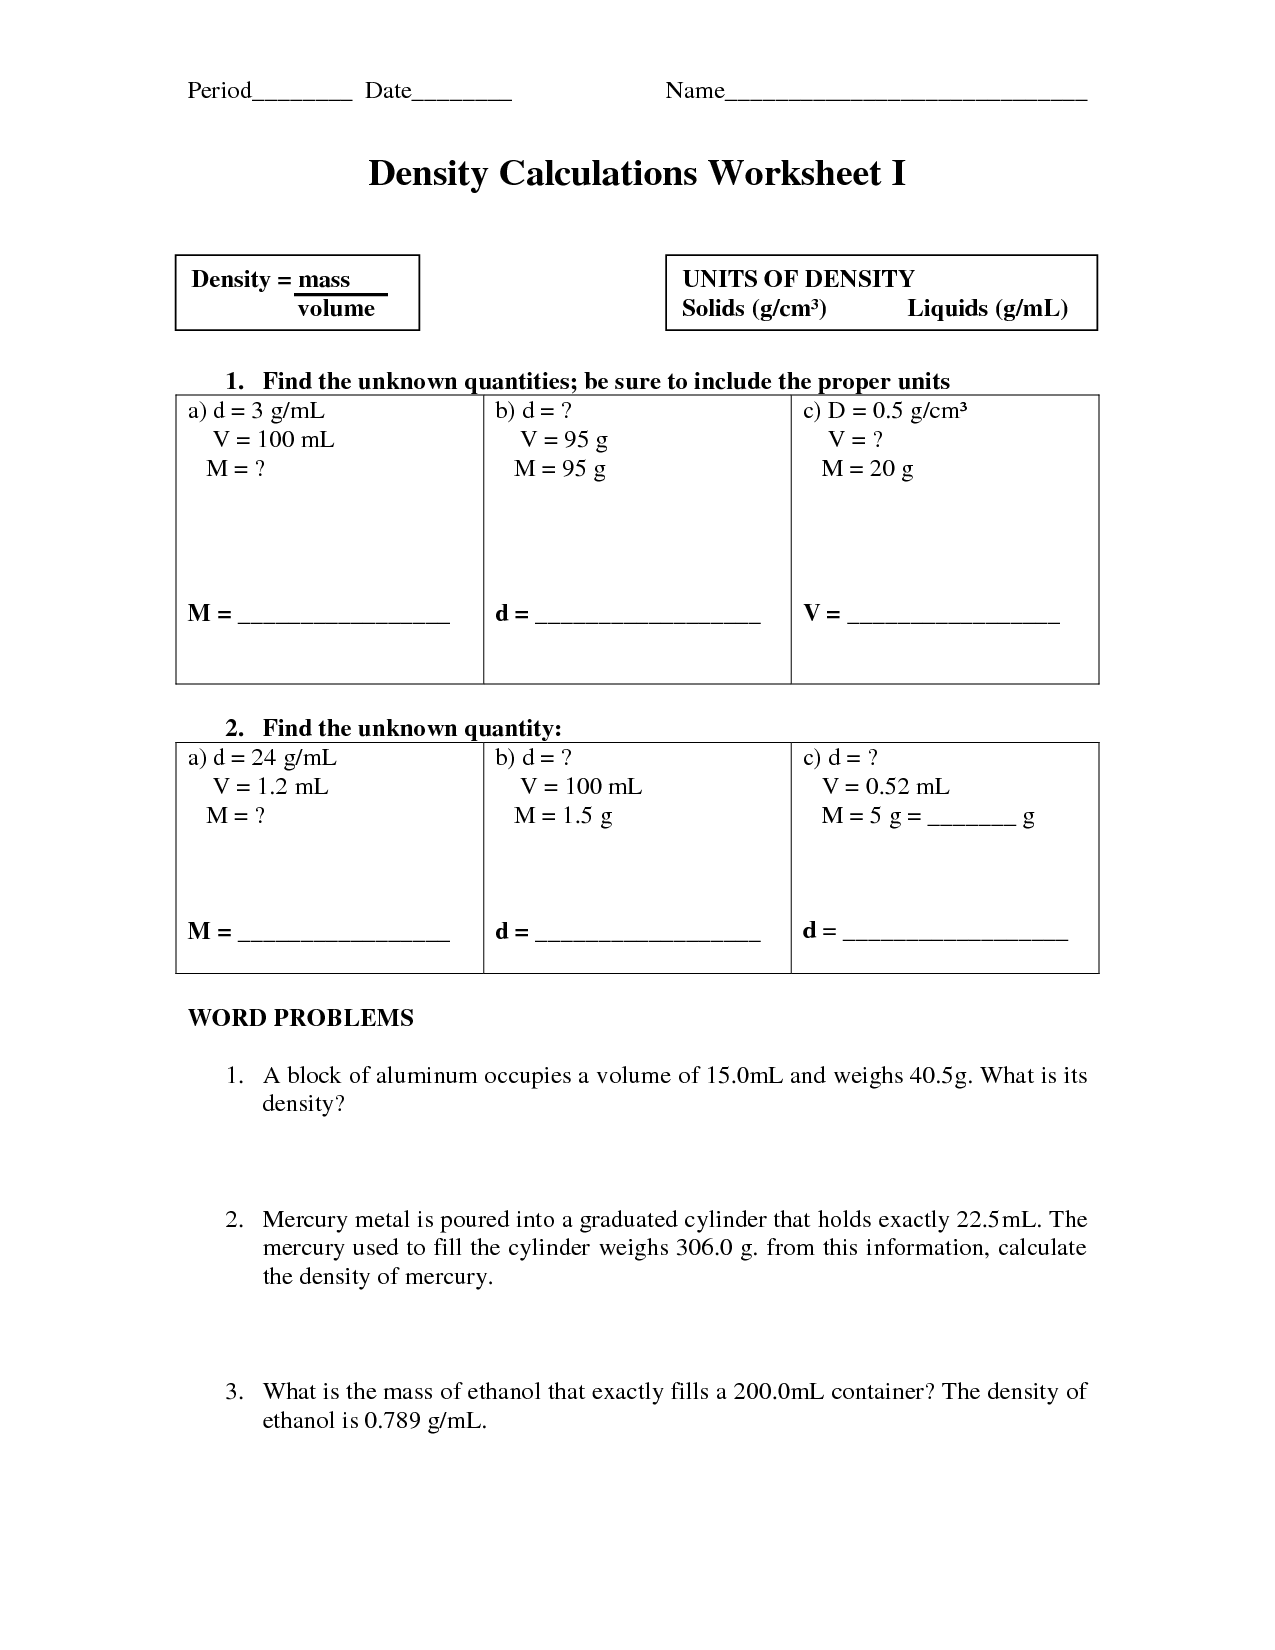 Density Calculations Worksheet Answers With Work